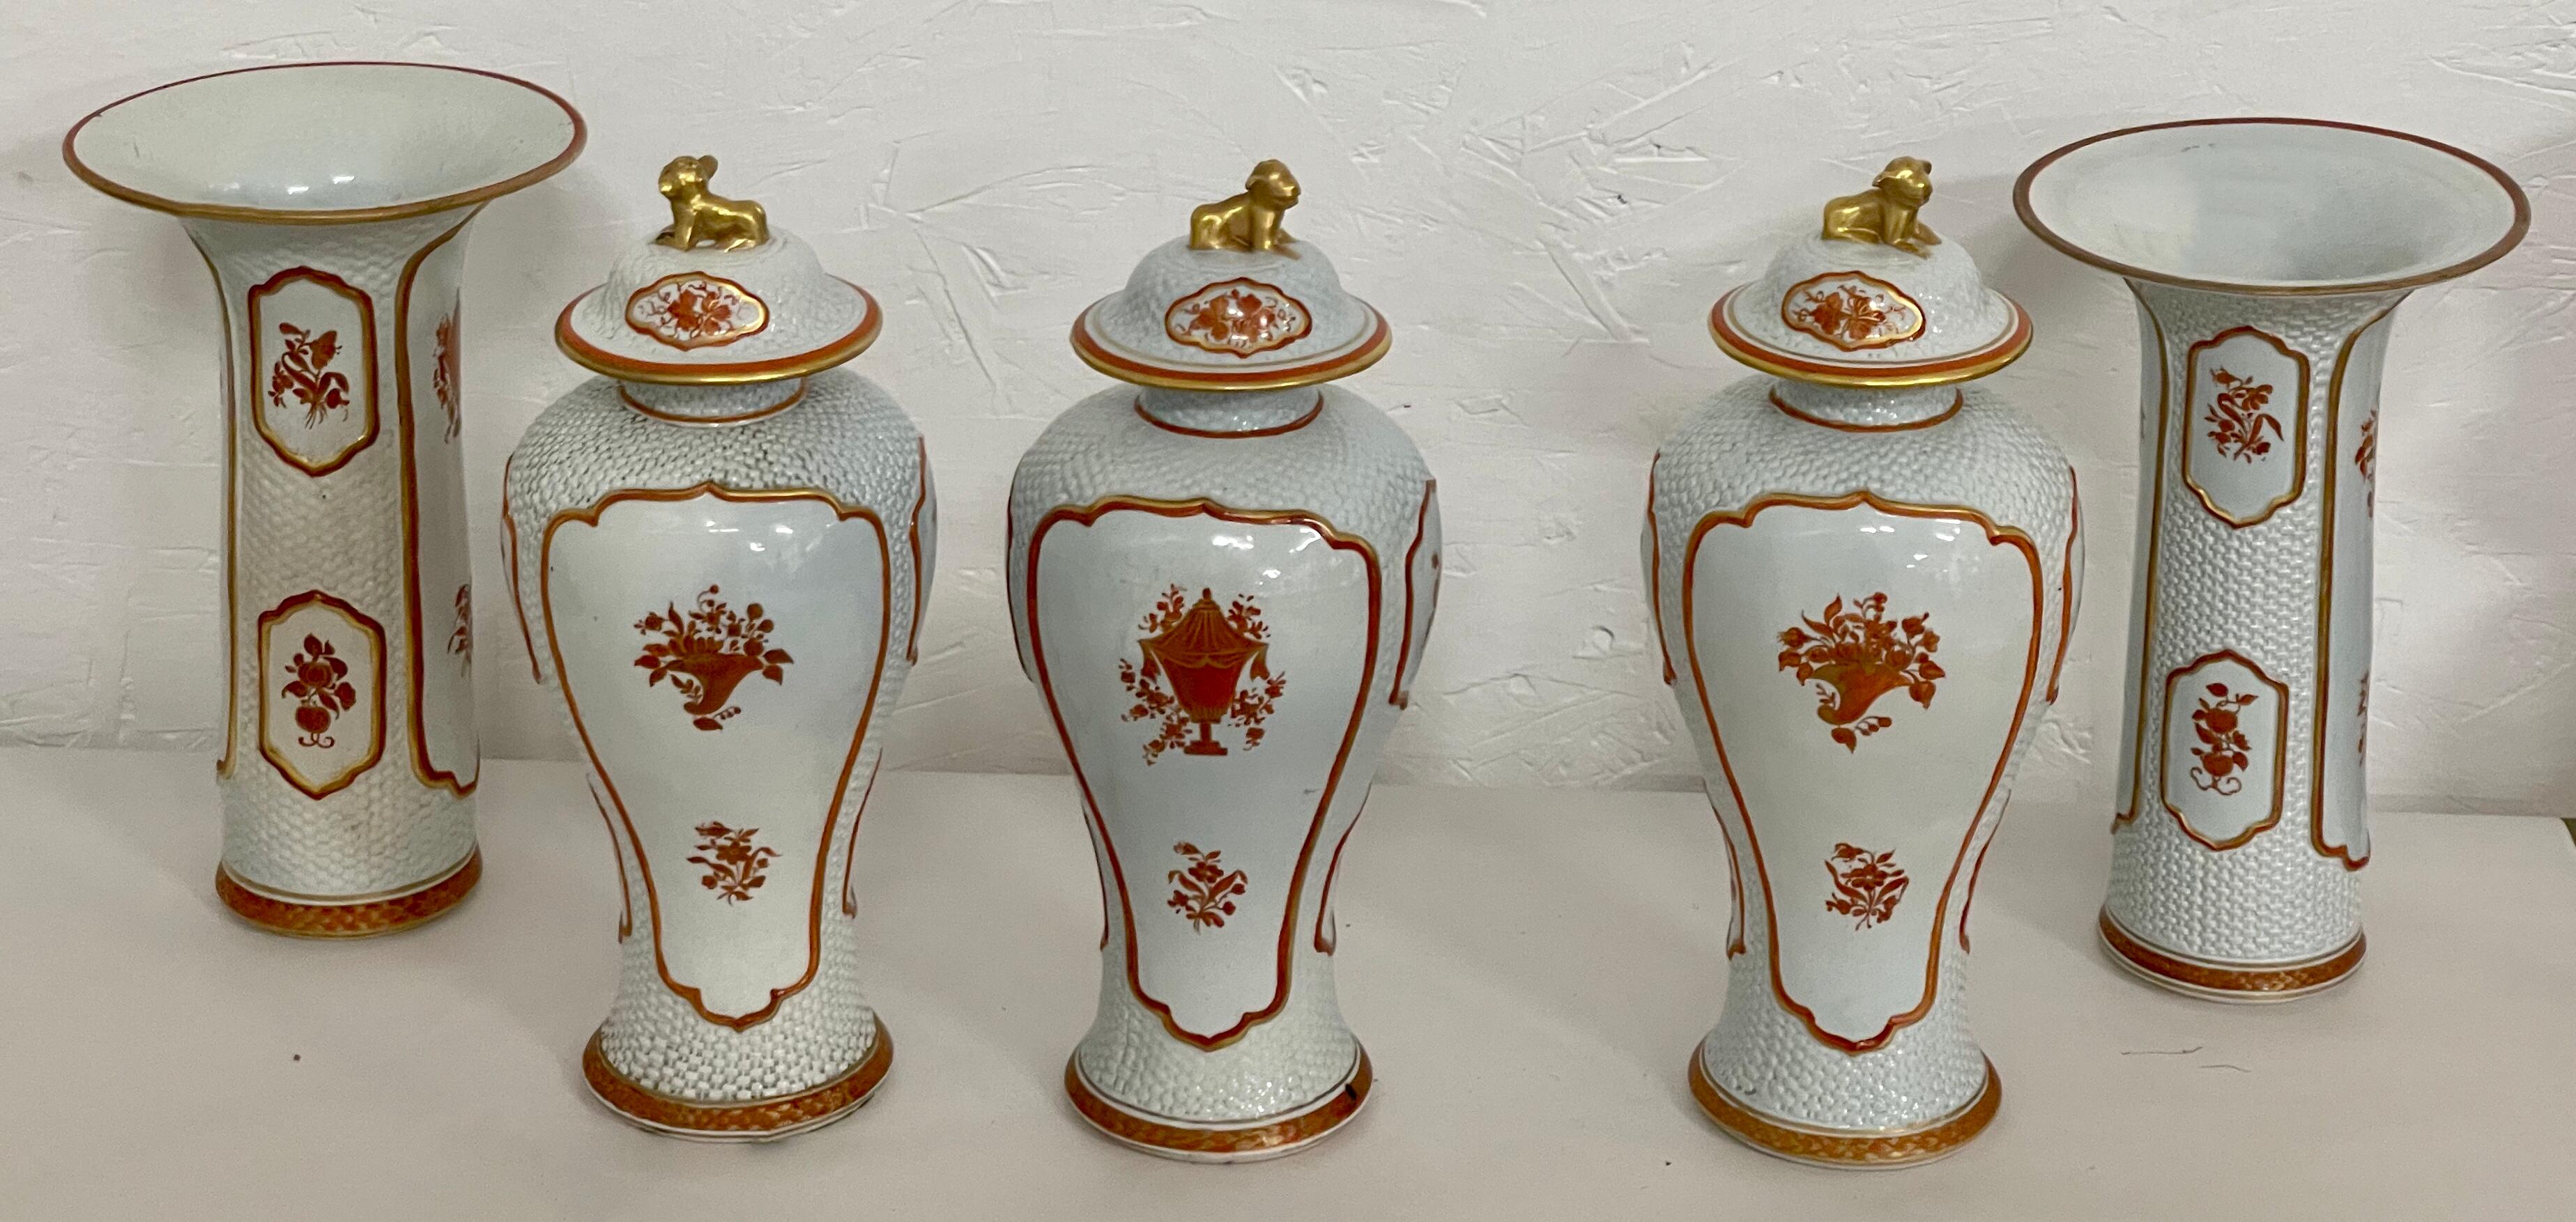 Italian Armorial Garniture Set with Vases and Foo Dog Ginger Jars by Mottahedeh, S/5